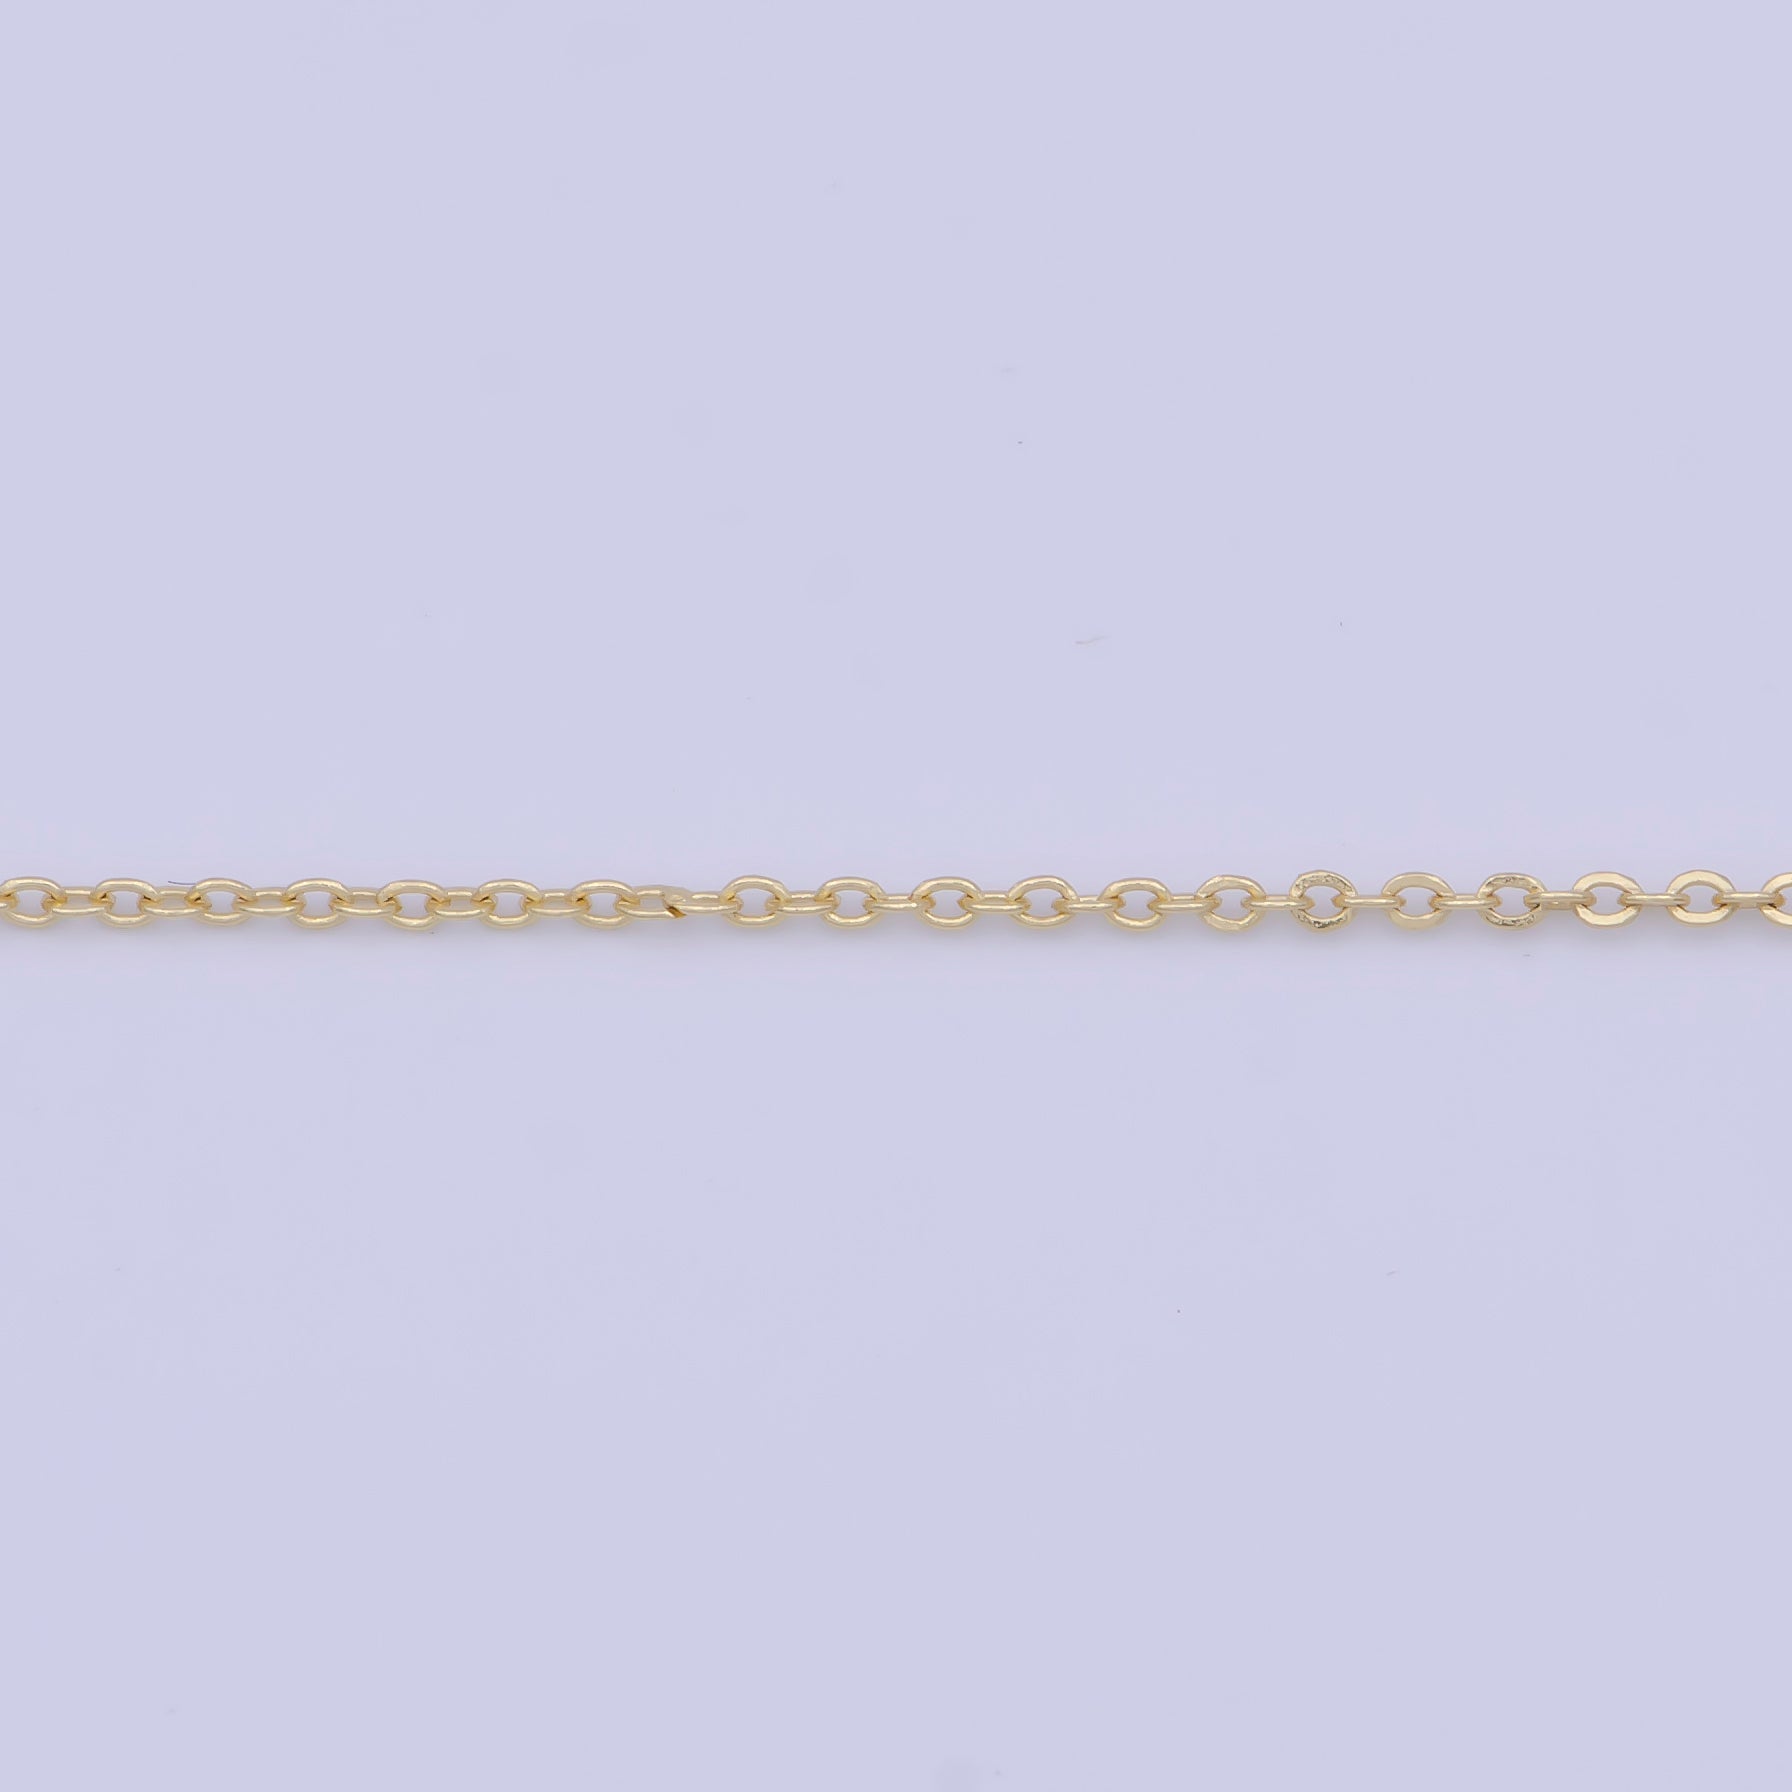 Dainty Gold Cable Chain Necklace Fine Link Chain Necklace Ready to Wear 17.5 Inch WA-1152 - DLUXCA